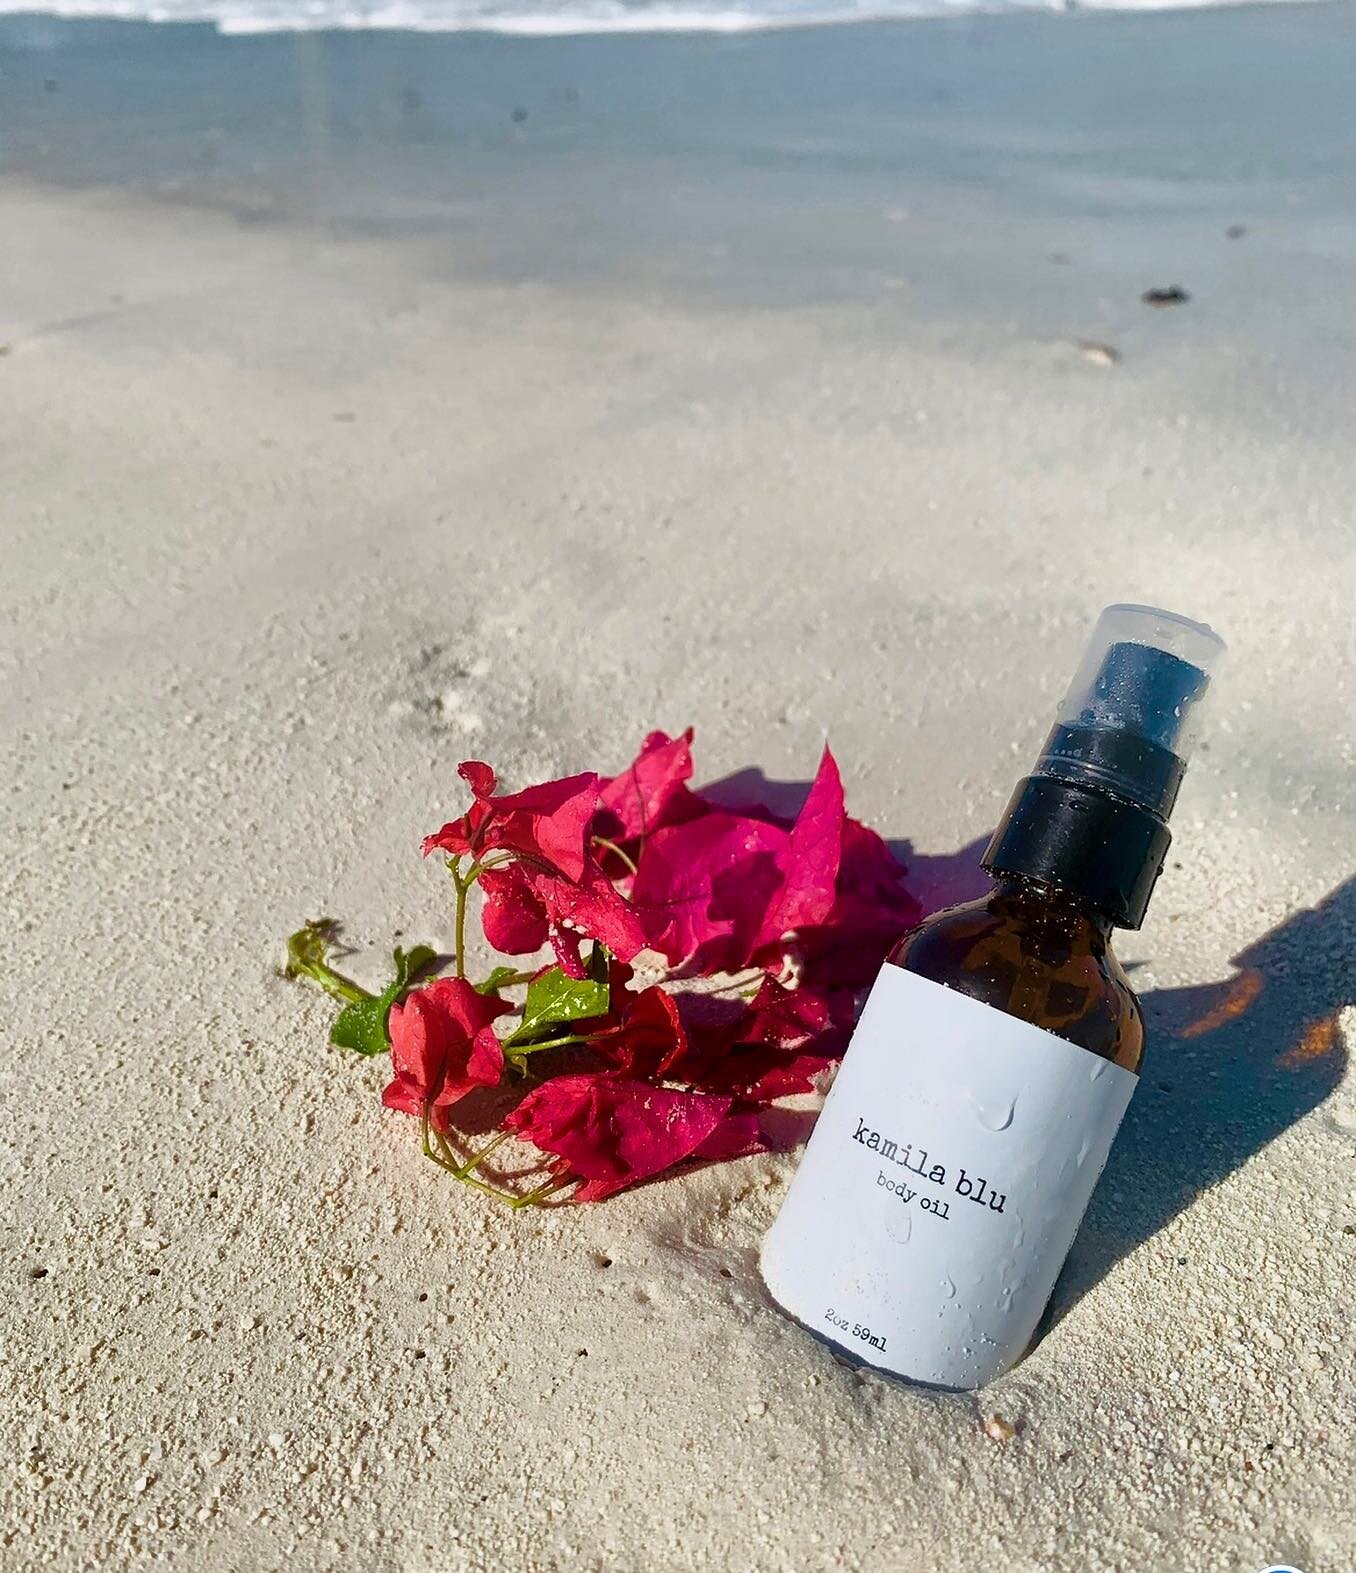 washed up with our body oil 🌺 moisturizer, cleanser, hair oil, beard oil, after sun care, and more ~ all-in-one ~ 💧